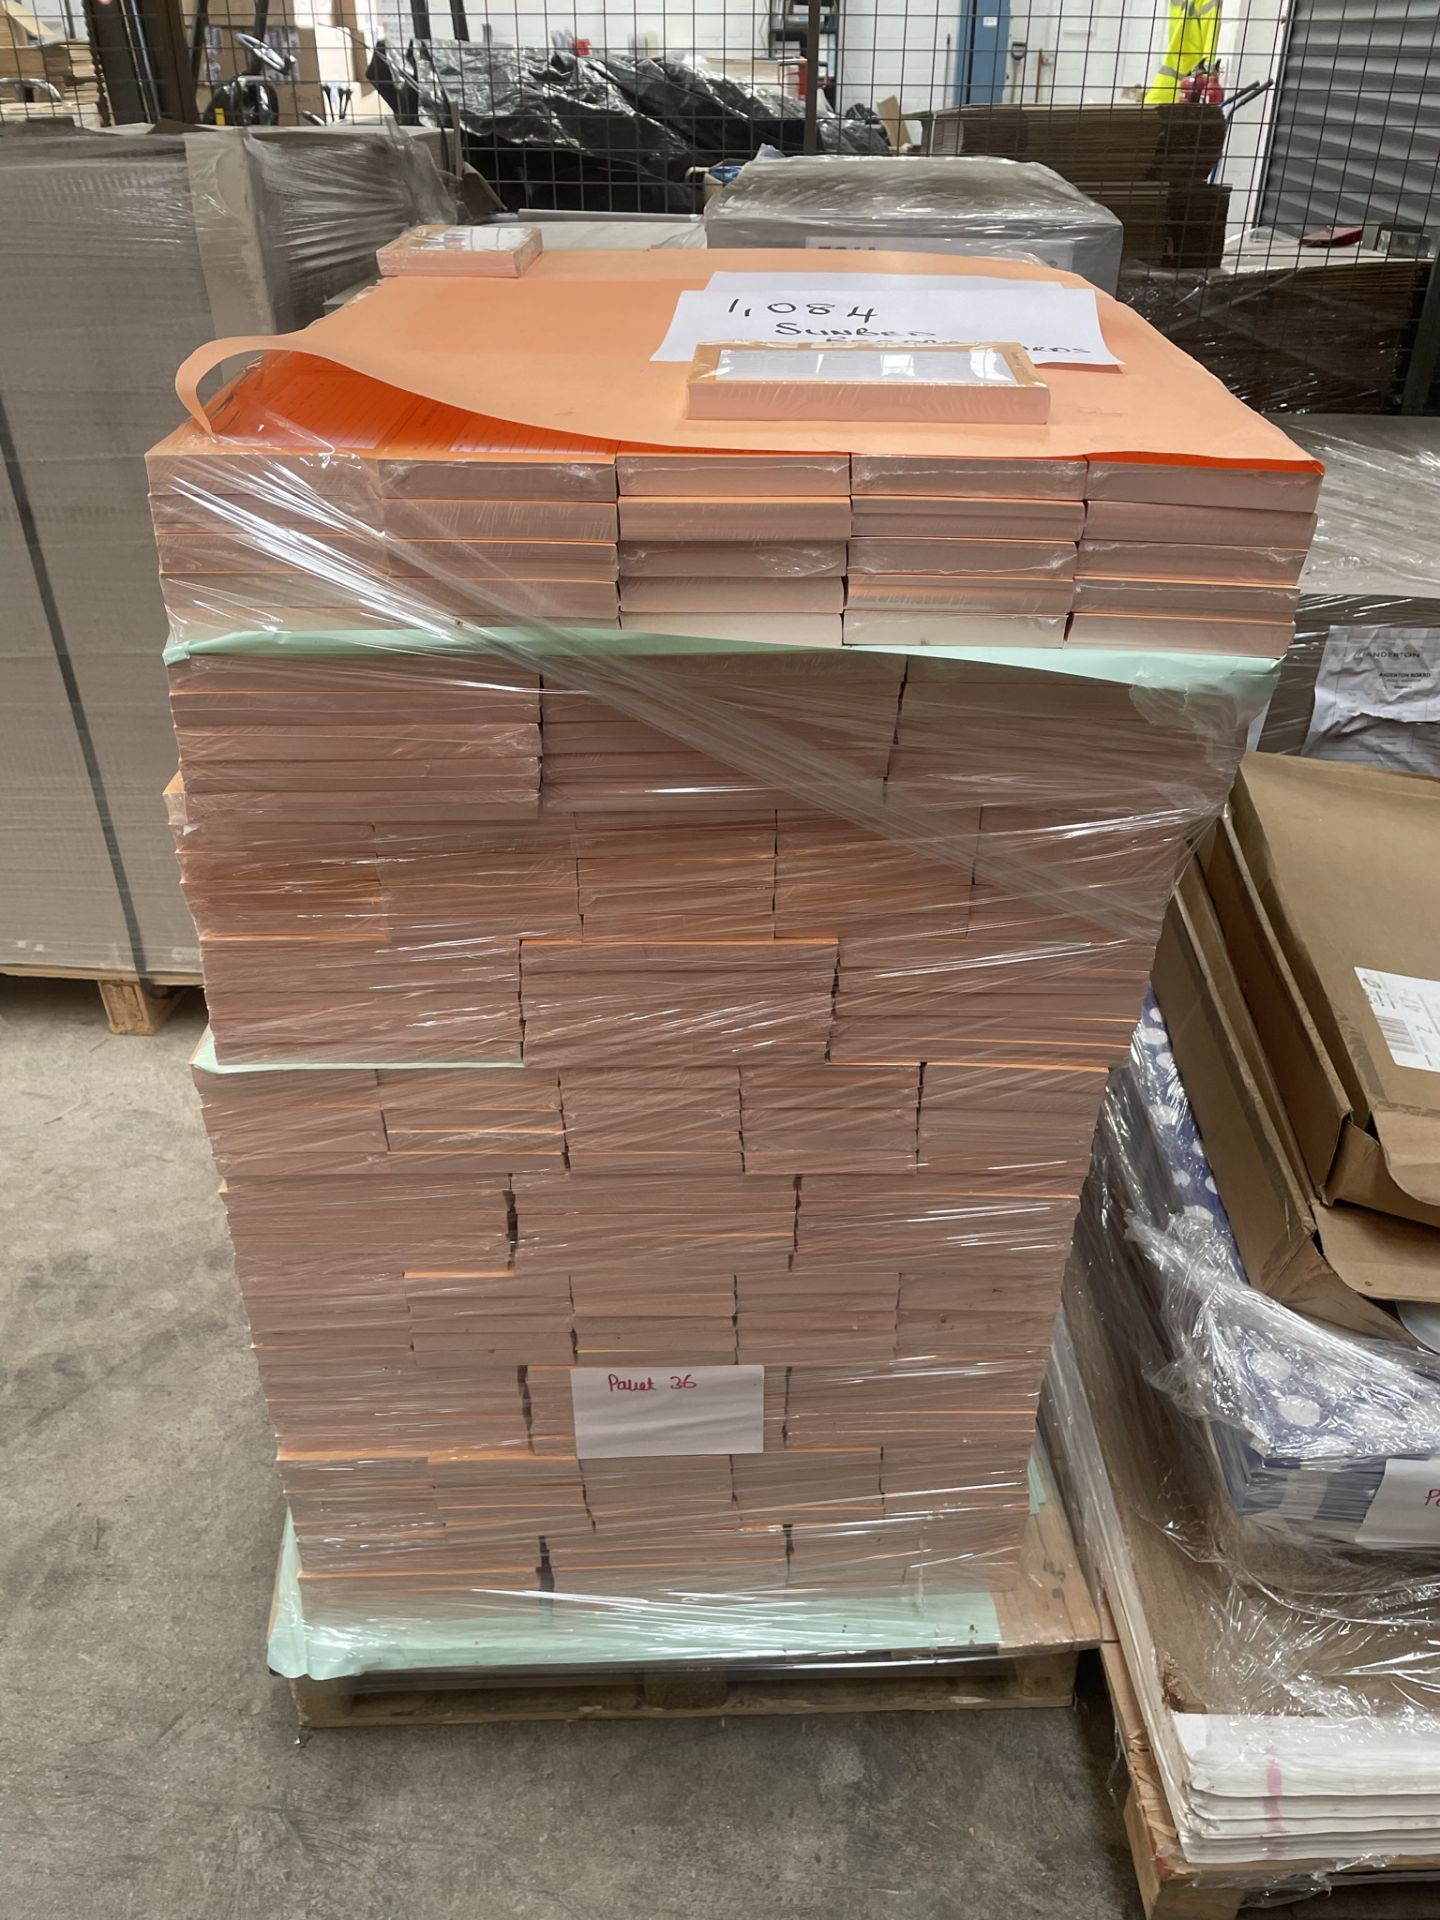 Approximately 1,000 x Packs of Quirepale Sunbed Record Cards